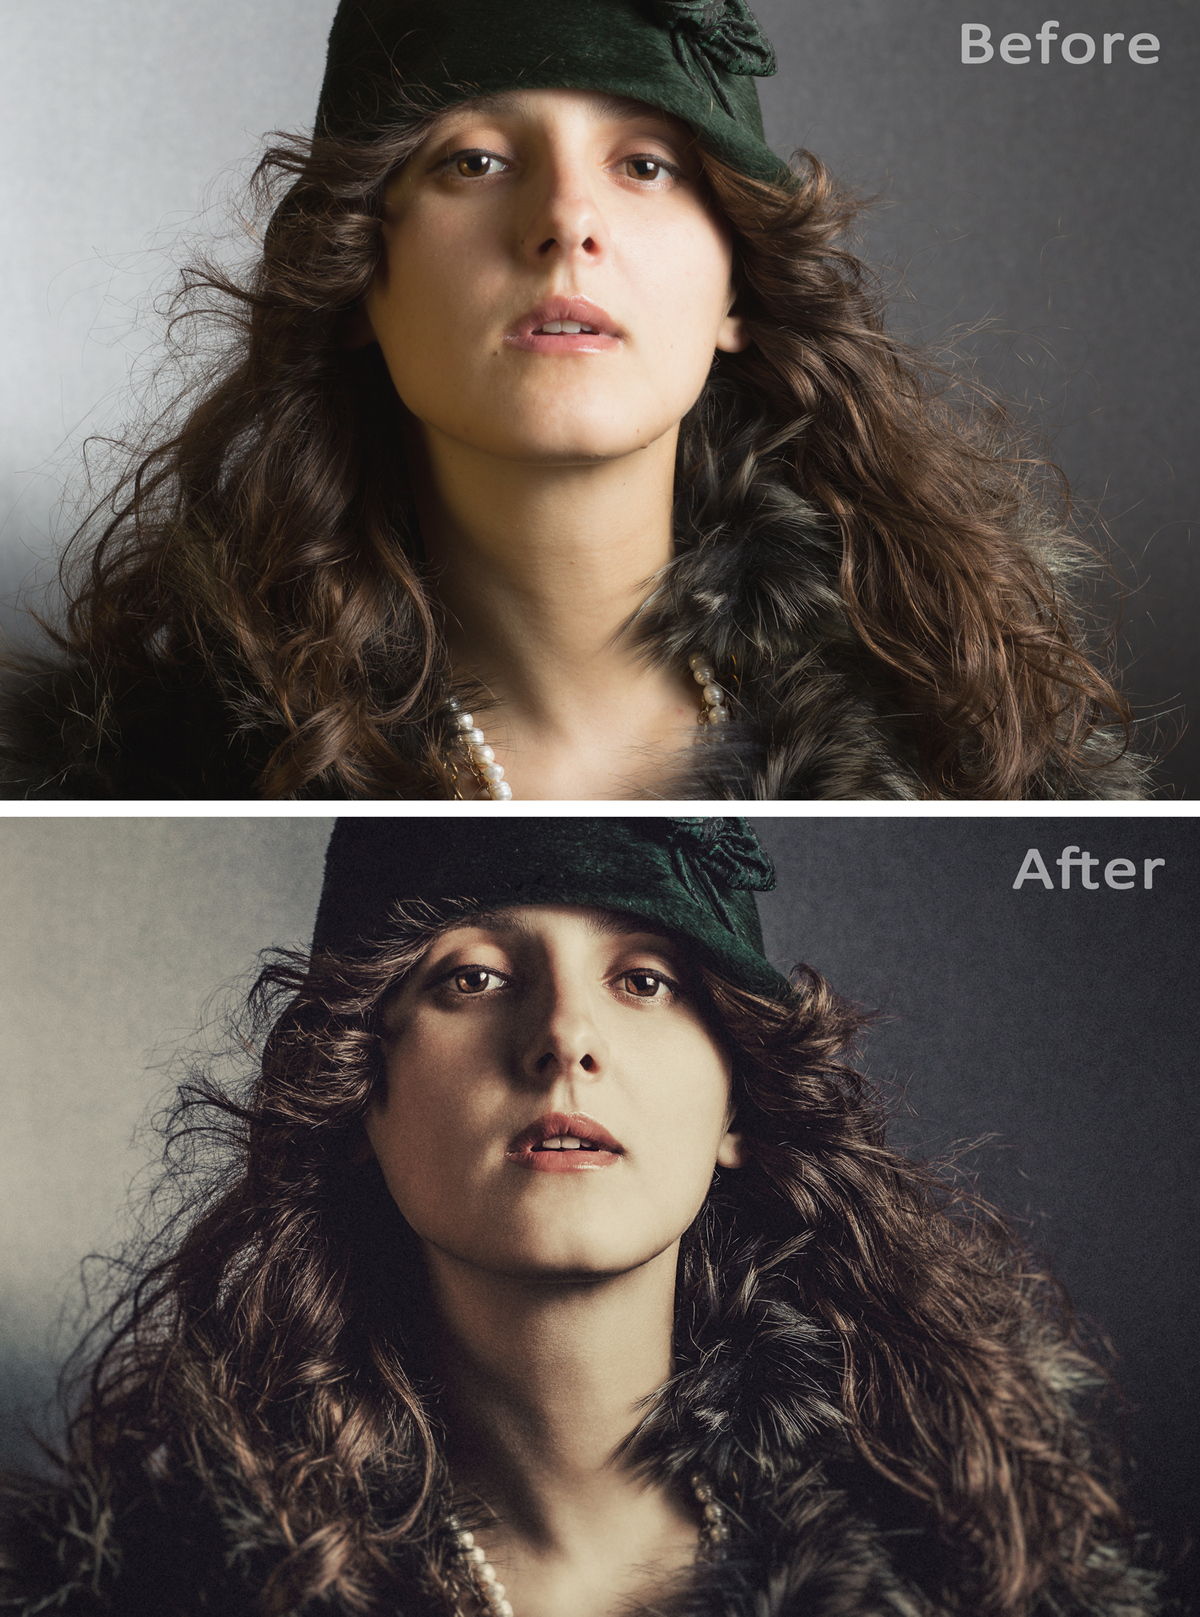 BEFORE AND AFTER-ДО И ПОСЛЕ